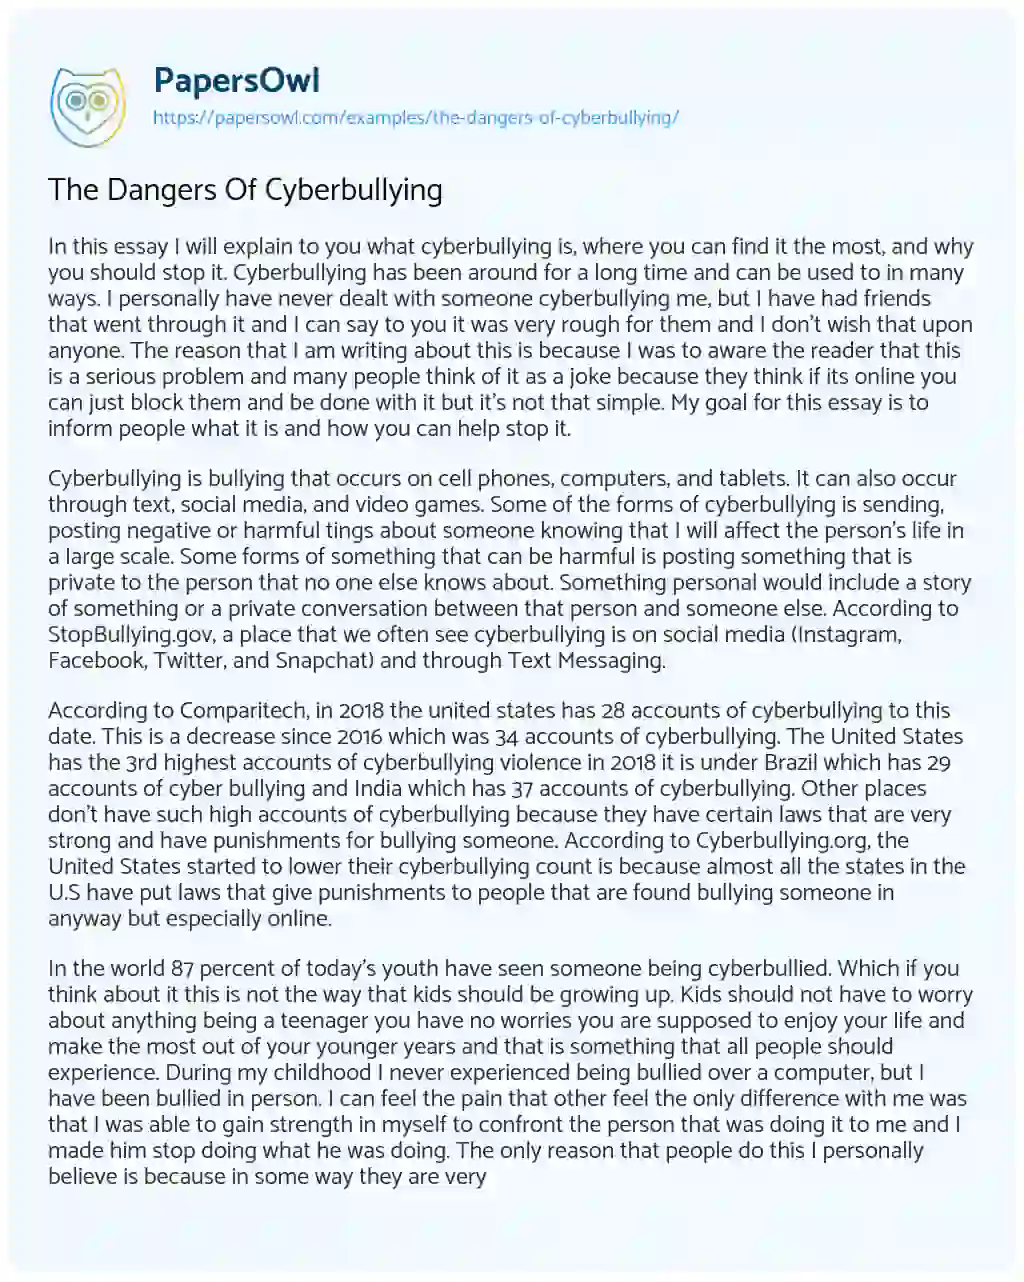 Essay on The Dangers of Cyberbullying